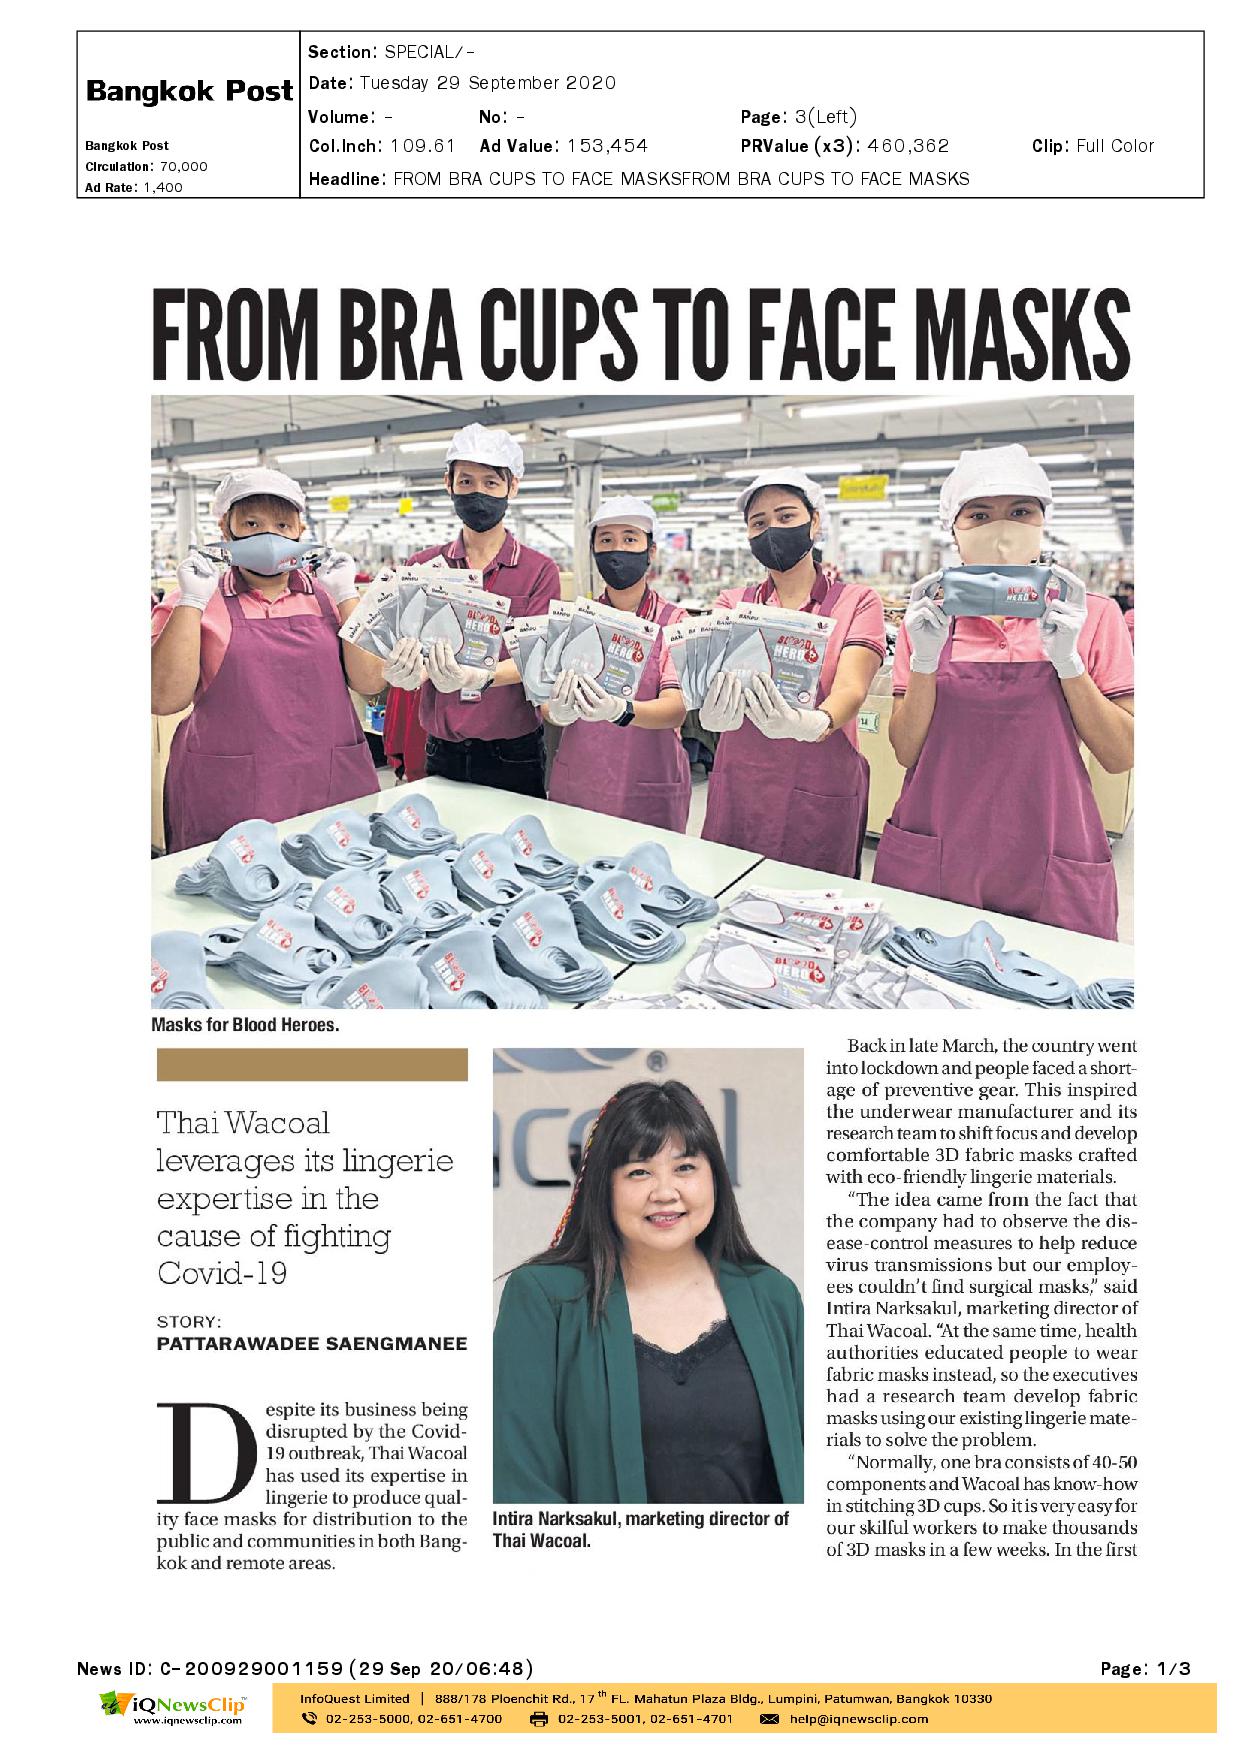 FROM BRA CUPS TO FACE MASKS